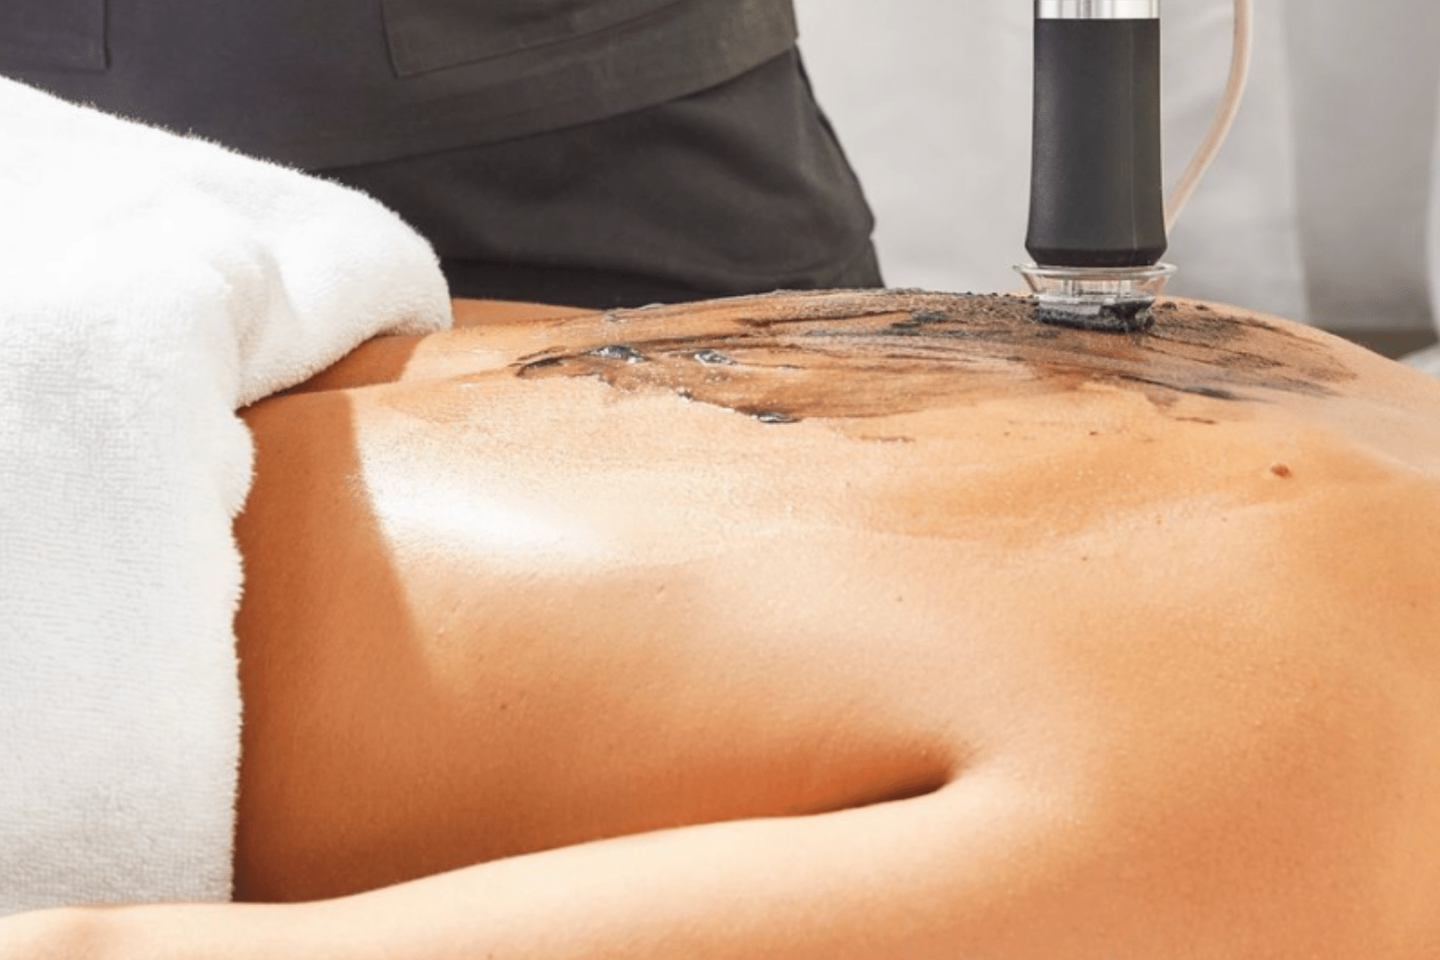 Esthetician performing Geneo full body facial treatment on a woman's back.